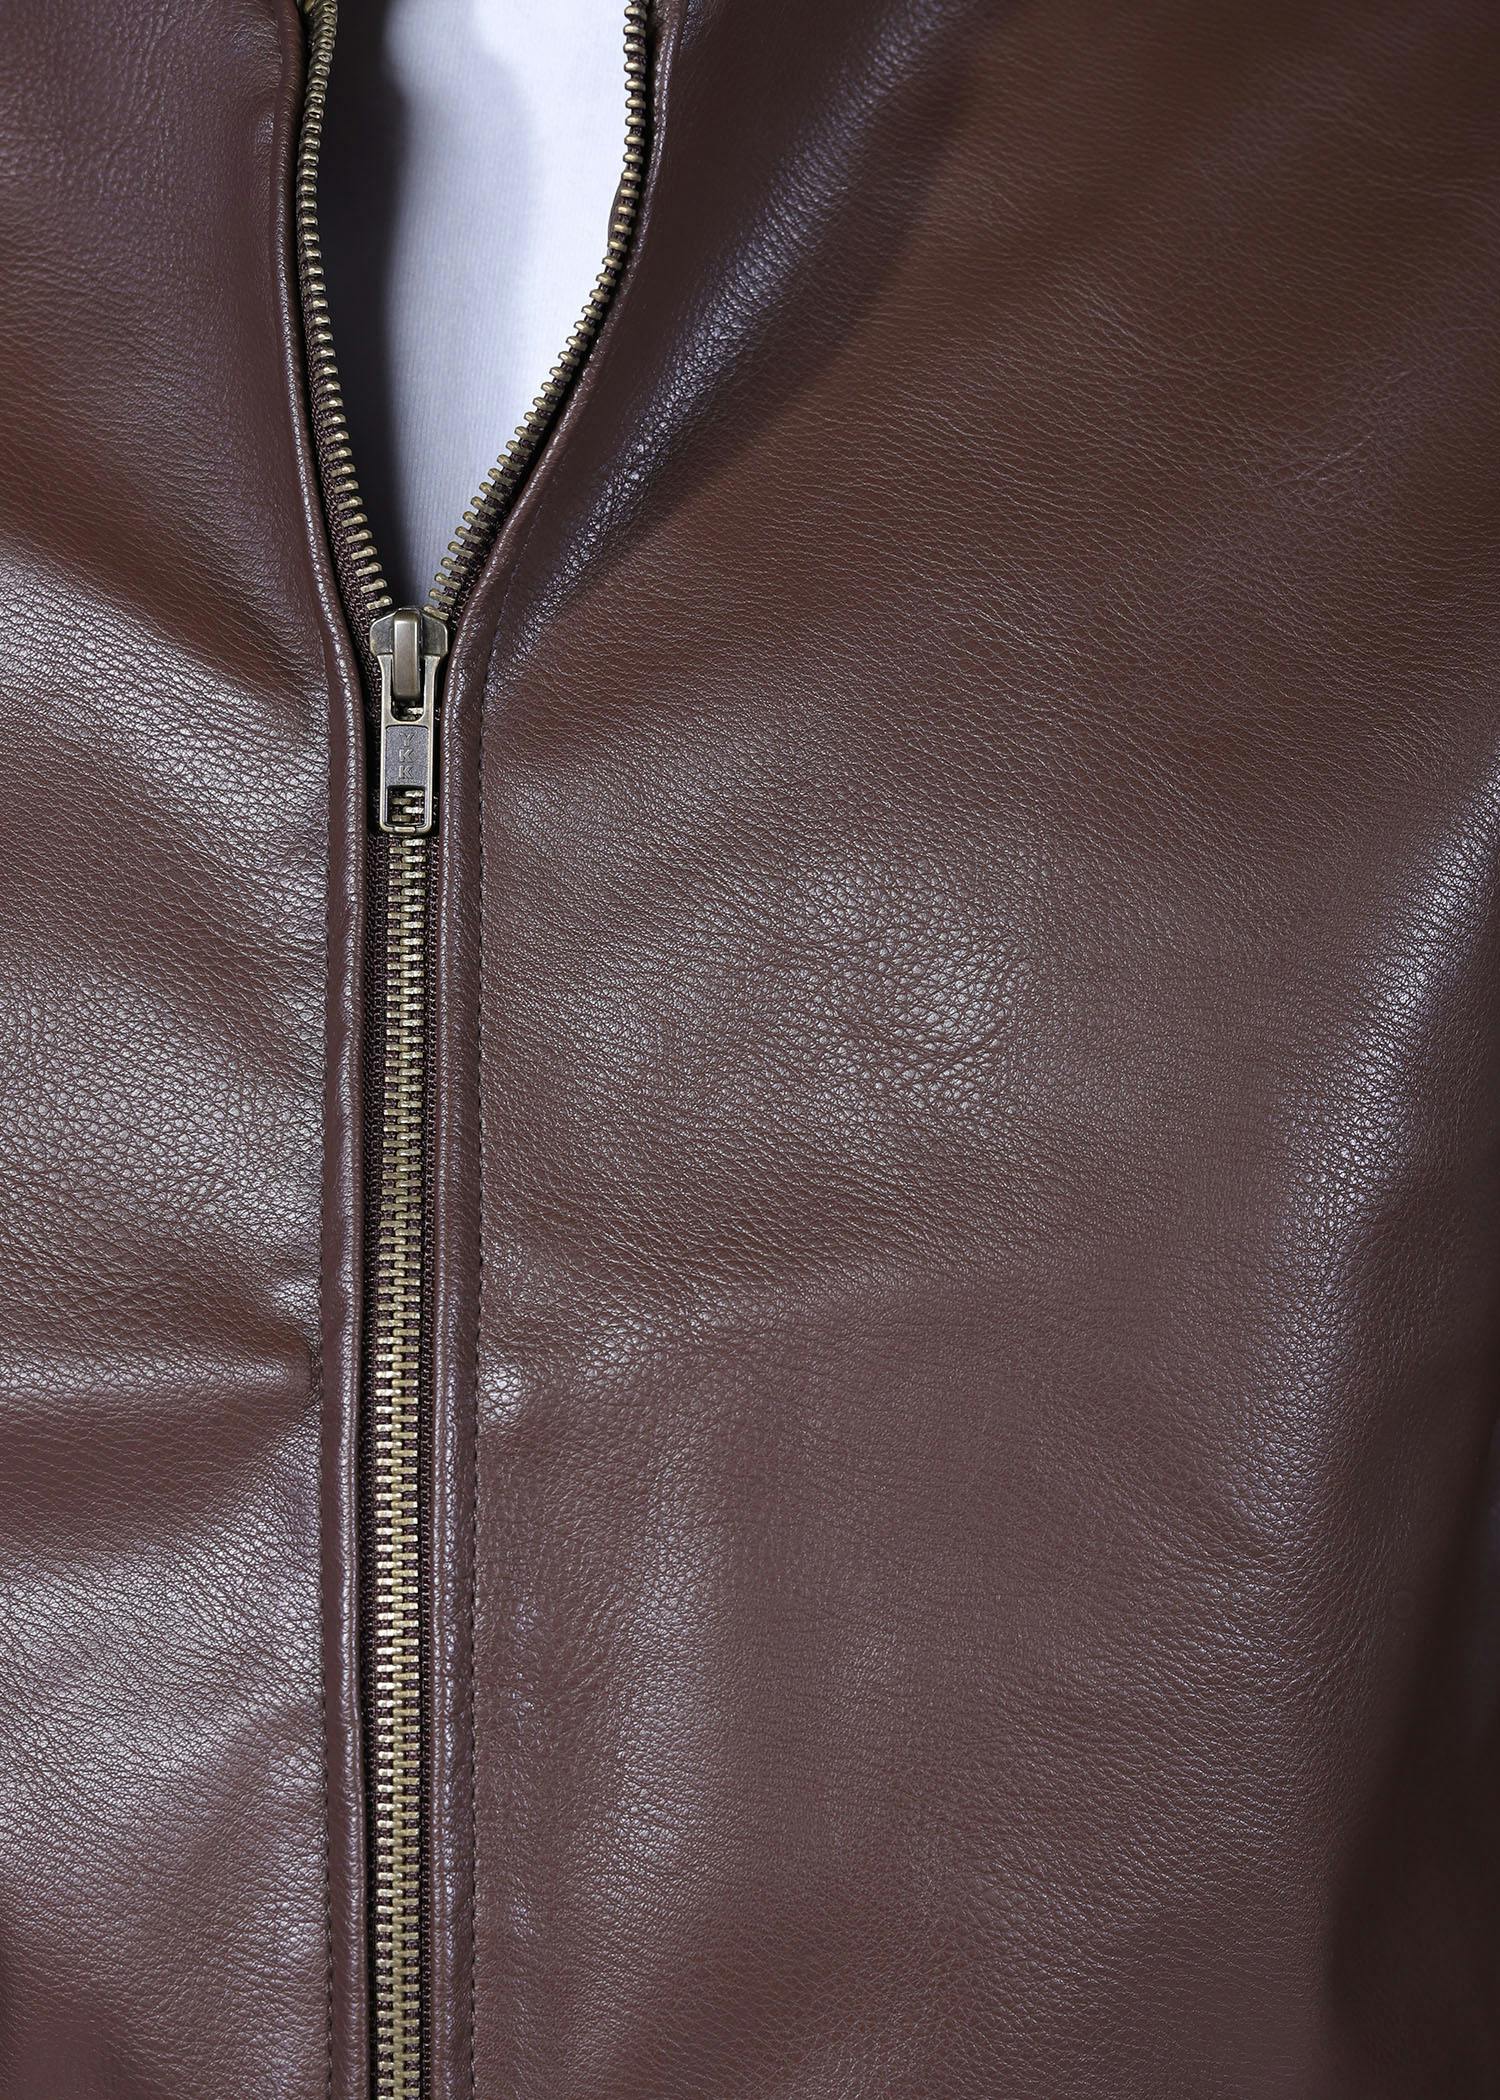 sunbittern leather jacket brown color close front view